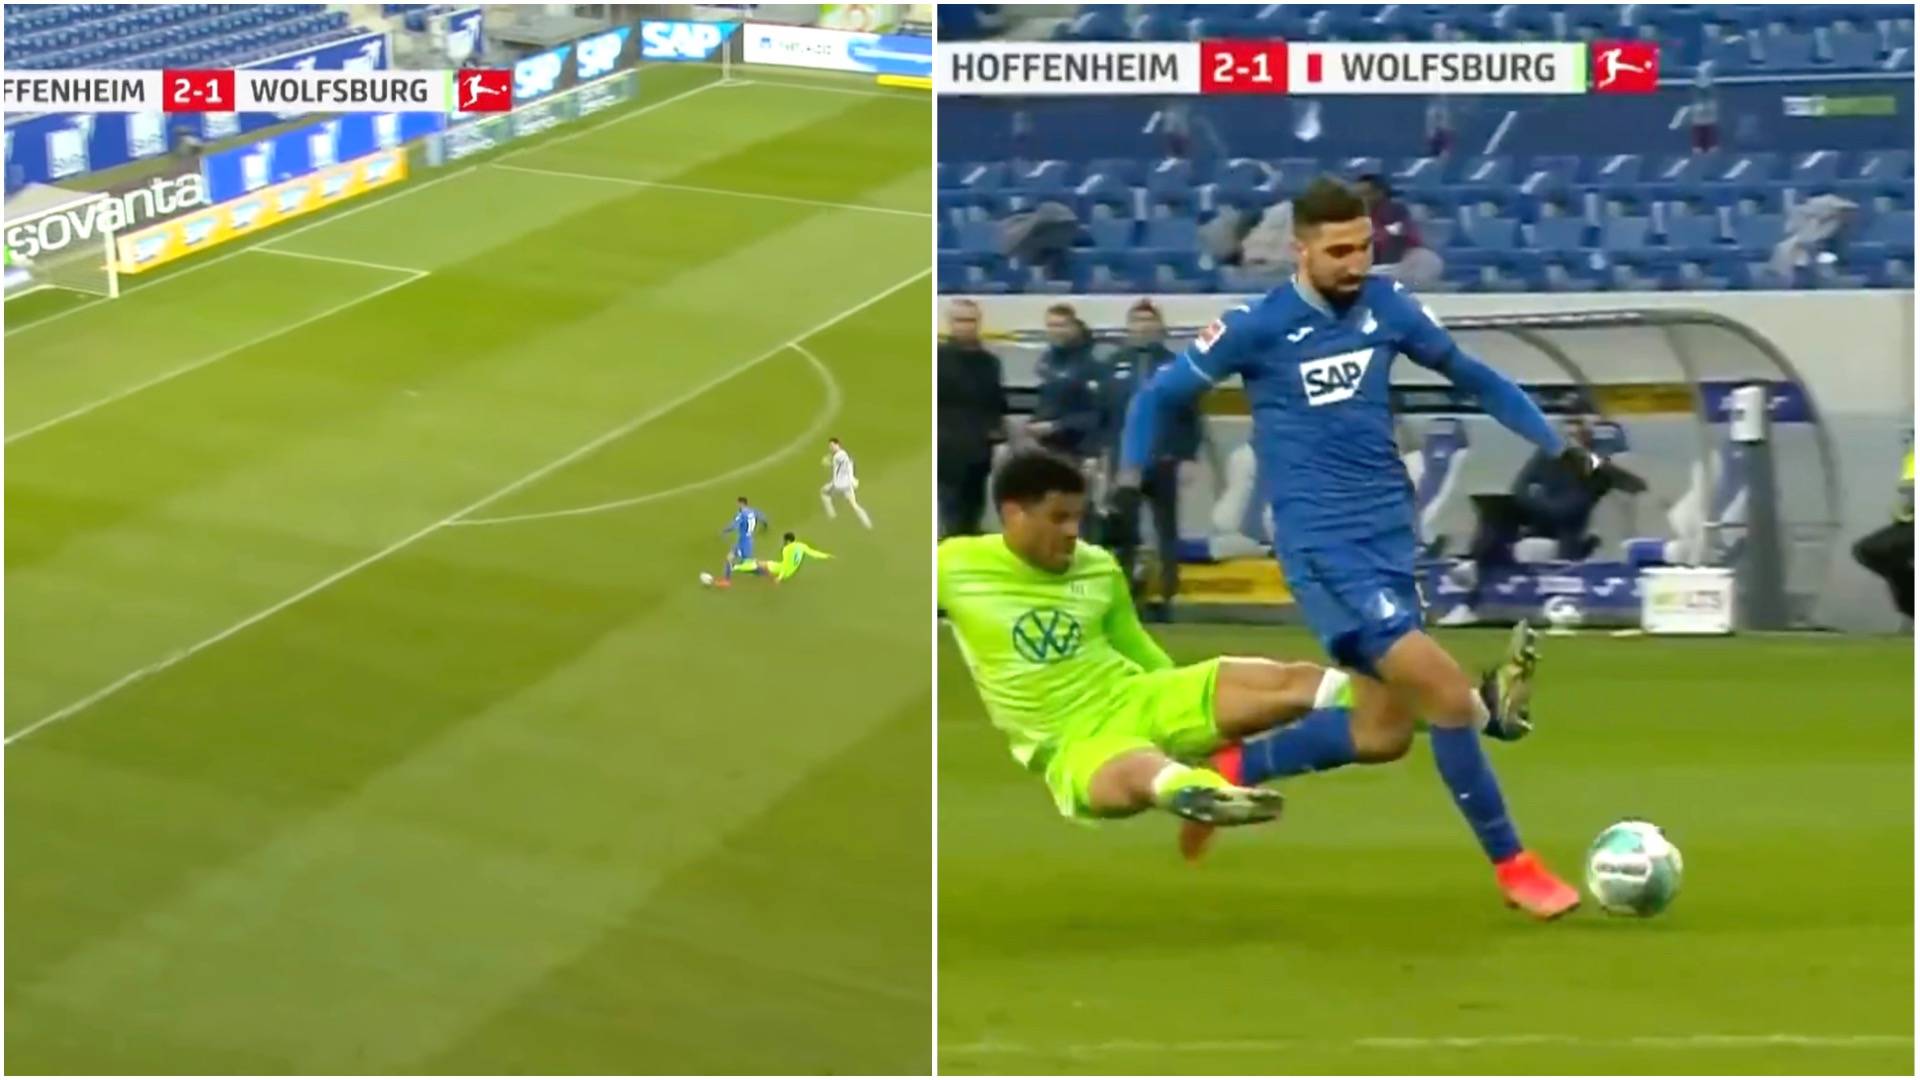 Wolfsburg defender is responsible for arguably football’s most cynical and savage red card tackle